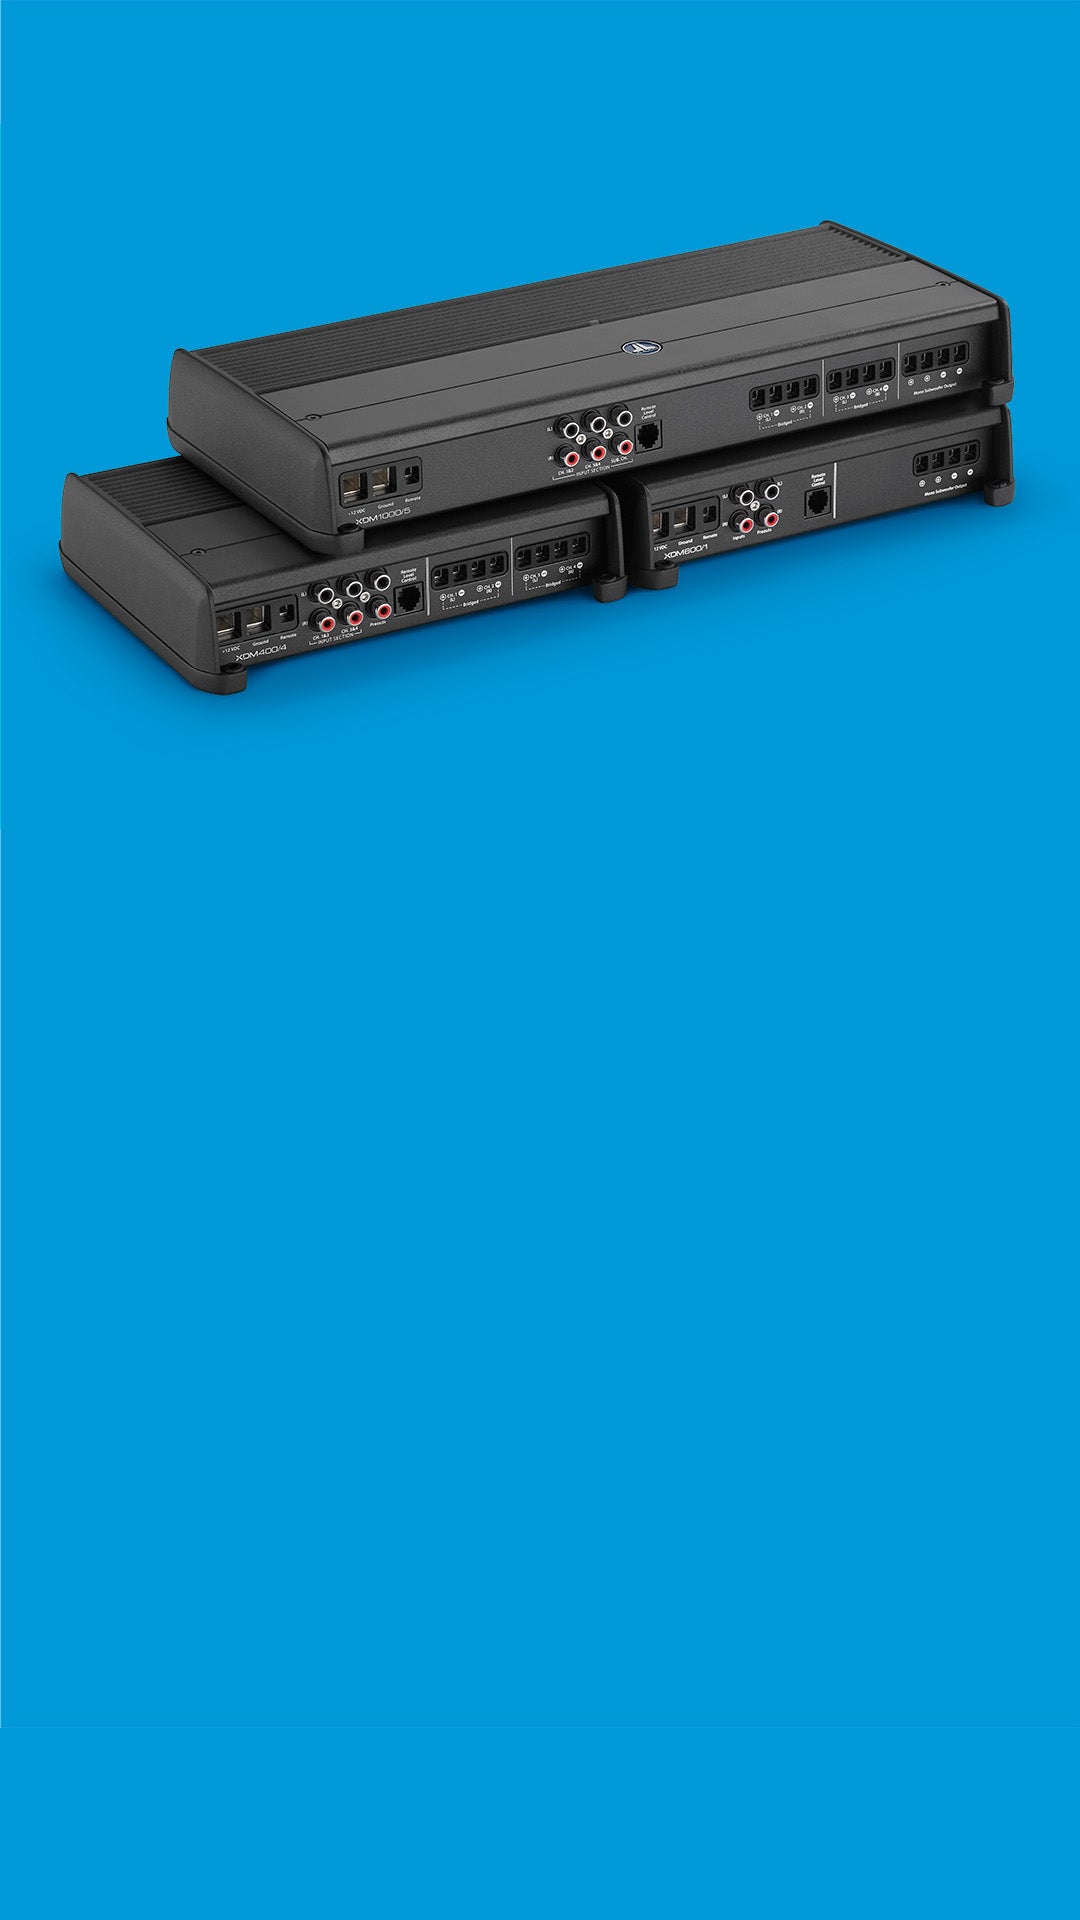 Two rows of XDM amplifiers stack on top of each other.